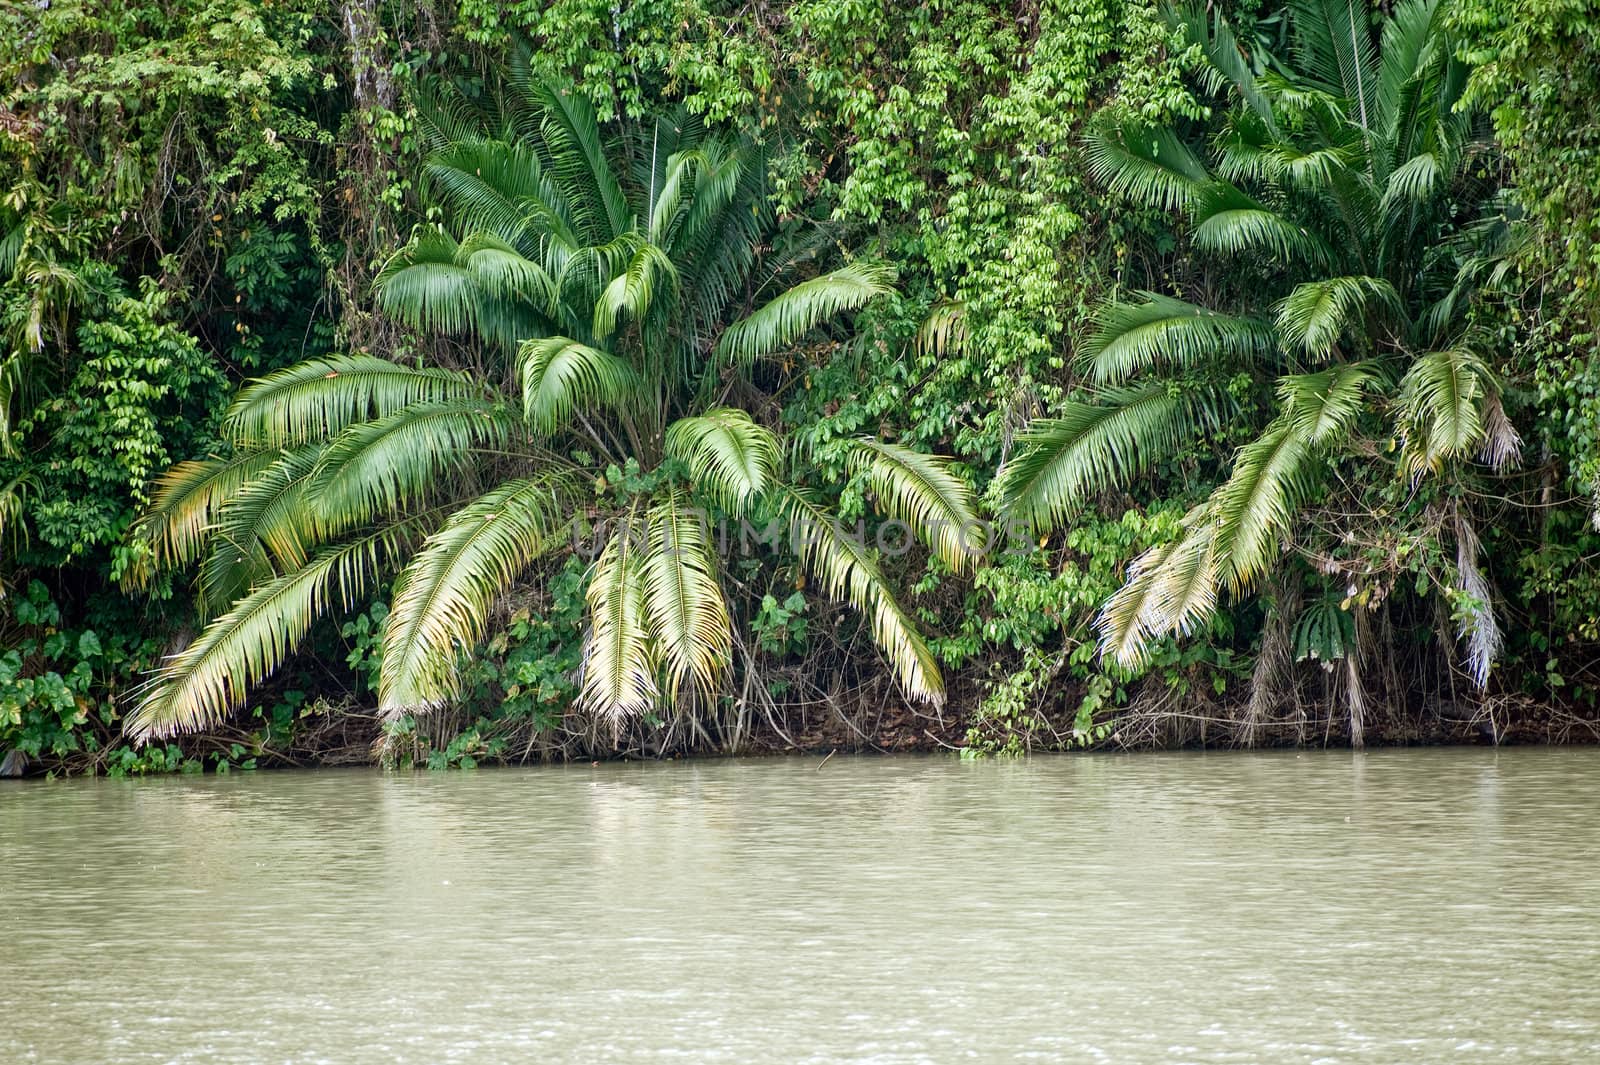 Palm trees at the bank of Panama canal by Marcus